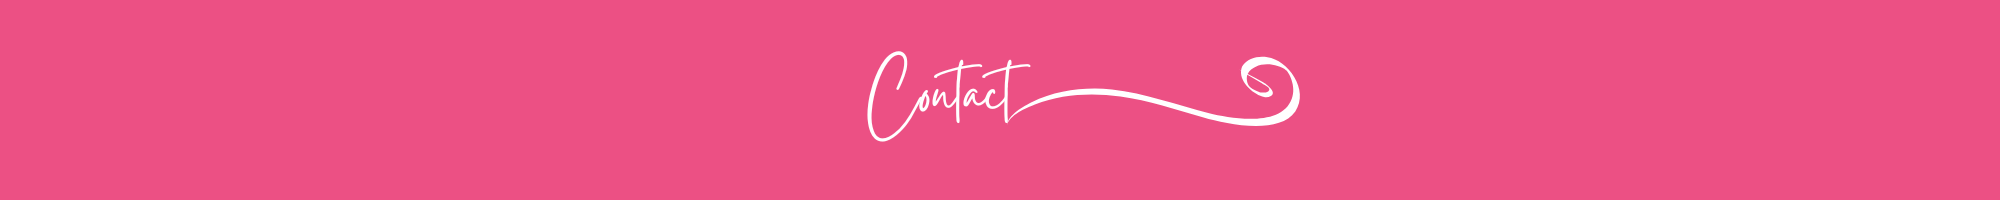 Header Image with pink background and the words Contact in white lettering